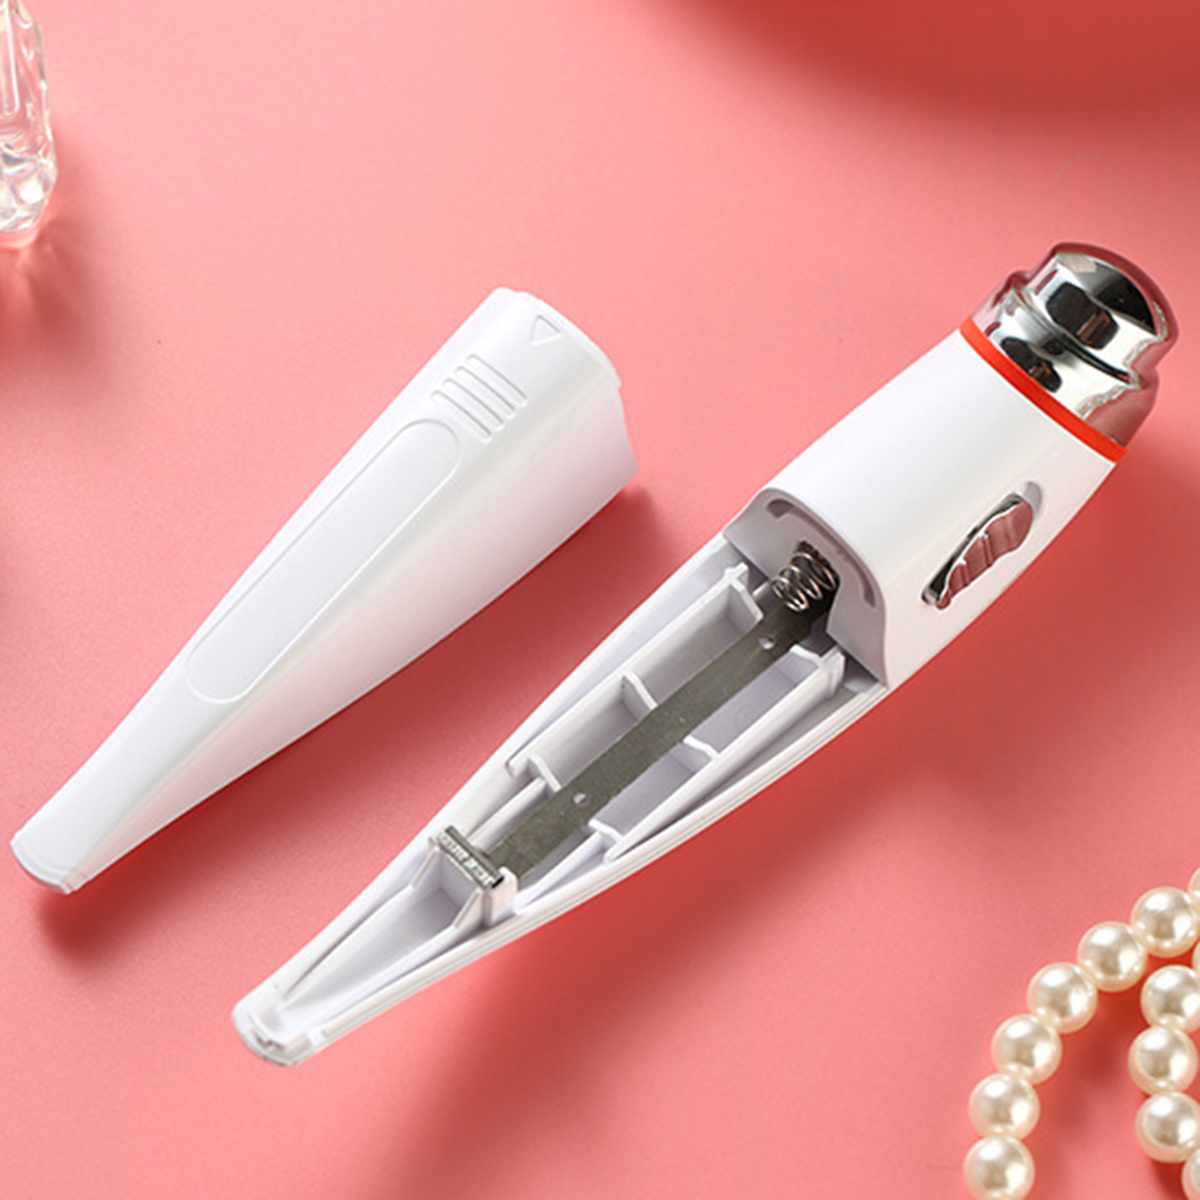 Electric-Vibration-Eye-Face-Massager-Anti-Ageing-Wrinkle-Lifting-Device-1422010